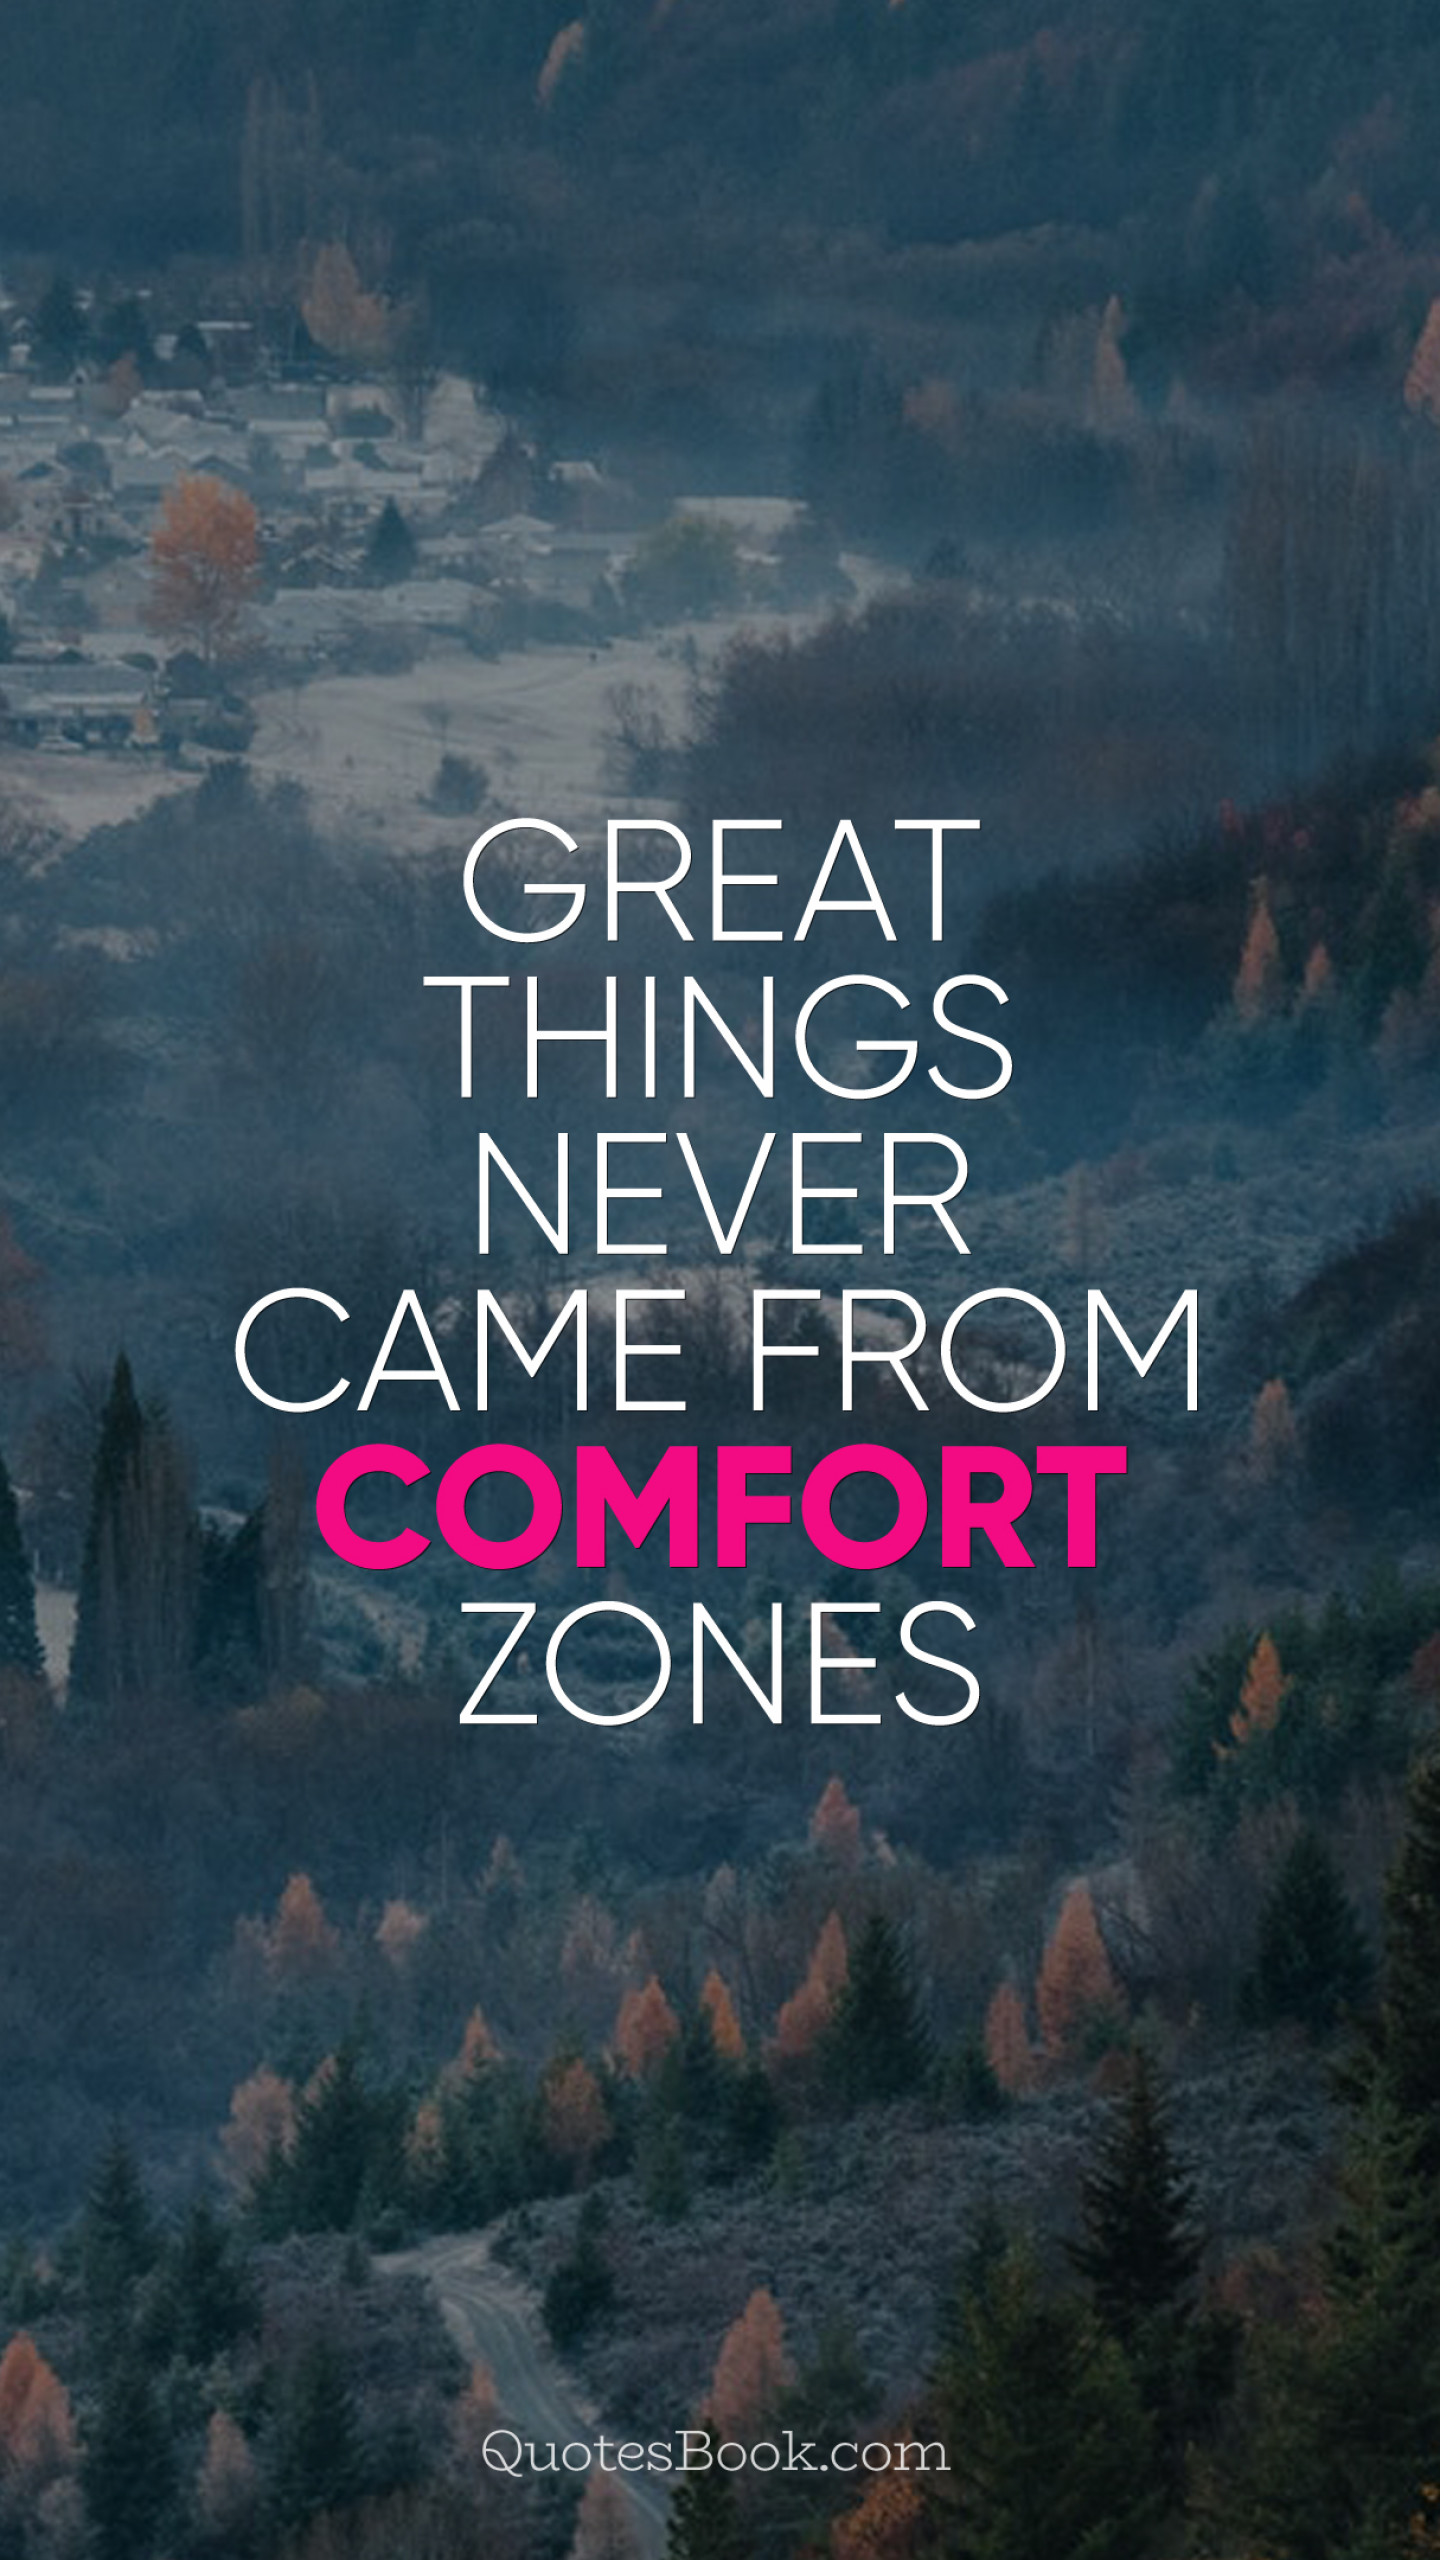 Great things never came from comfort zones - QuotesBook